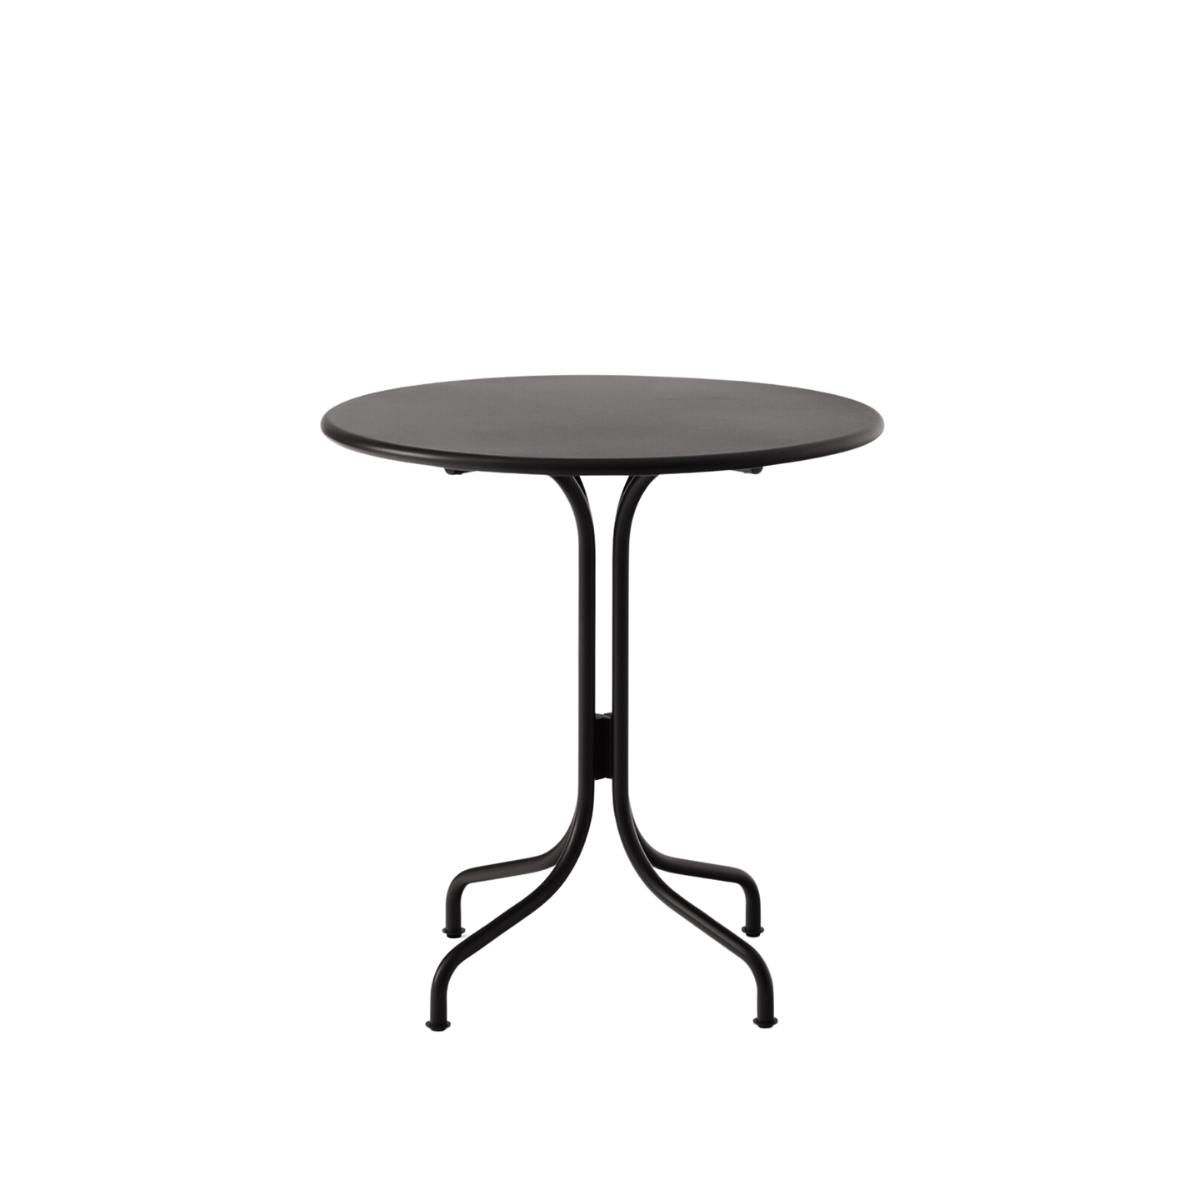 &Tradition | Thorvald Outdoor Café Table SC96